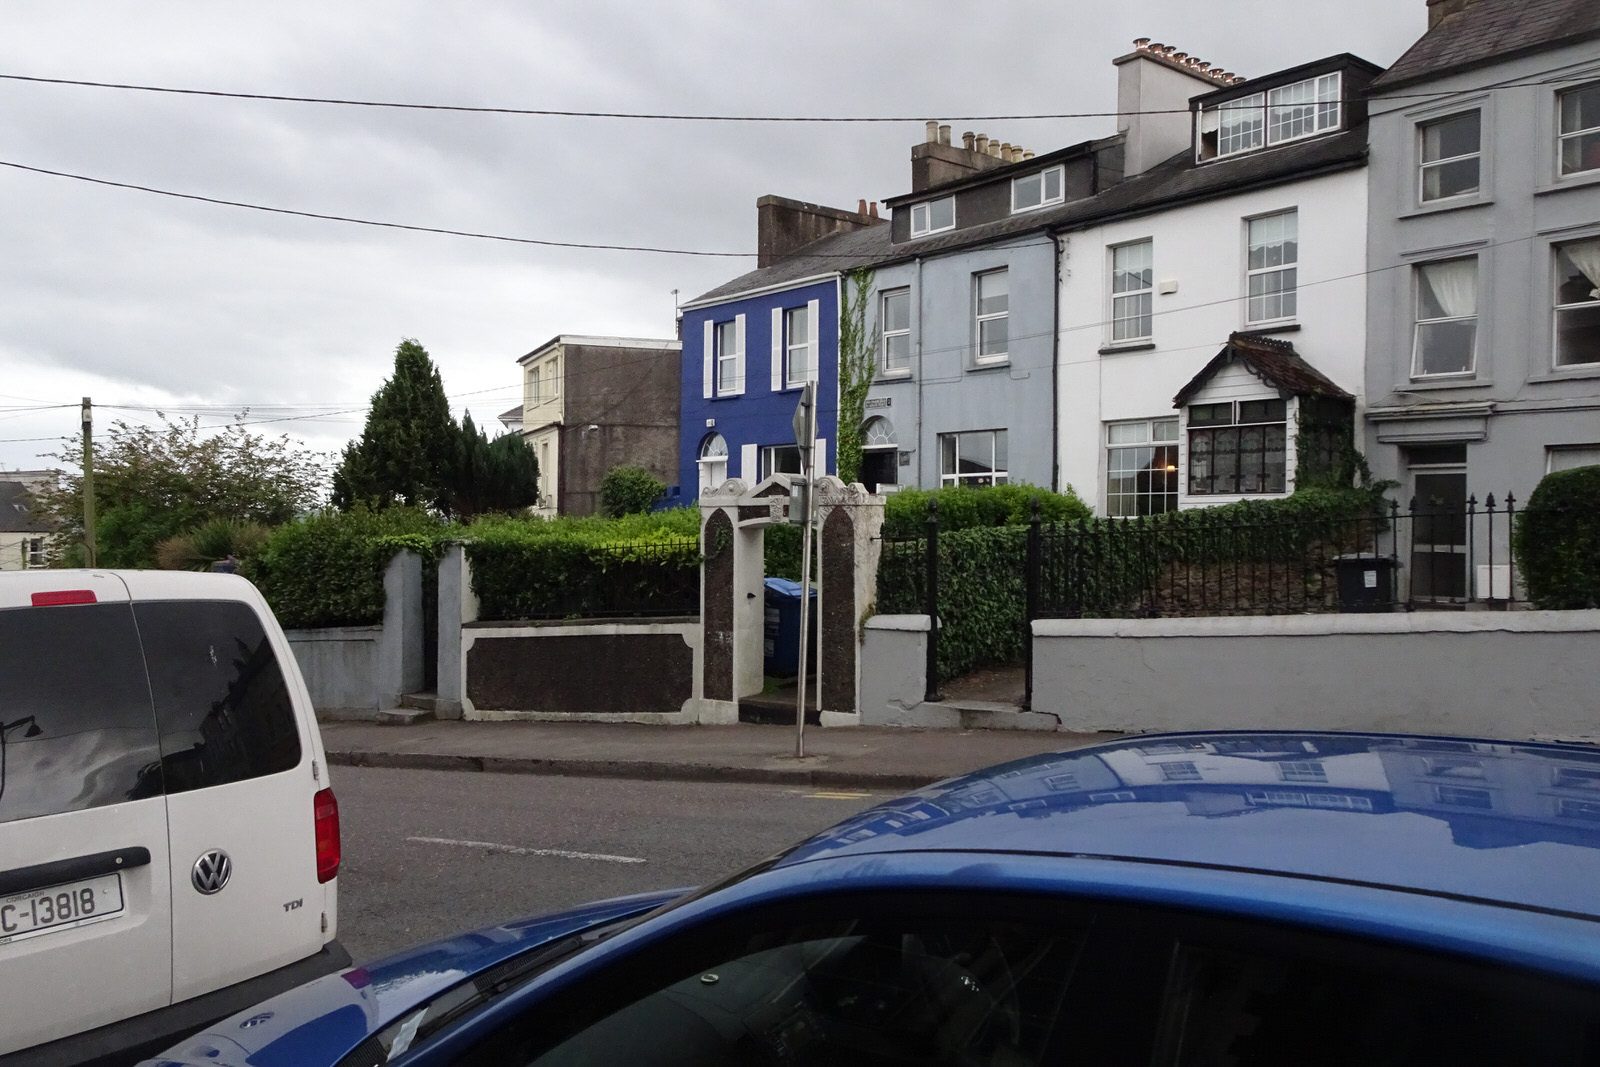 A WALK ALONG SUMMERHILL NORTH [IN CORK EVERYWHERE IS UPHILL OR DOWNHILL]-225839-1